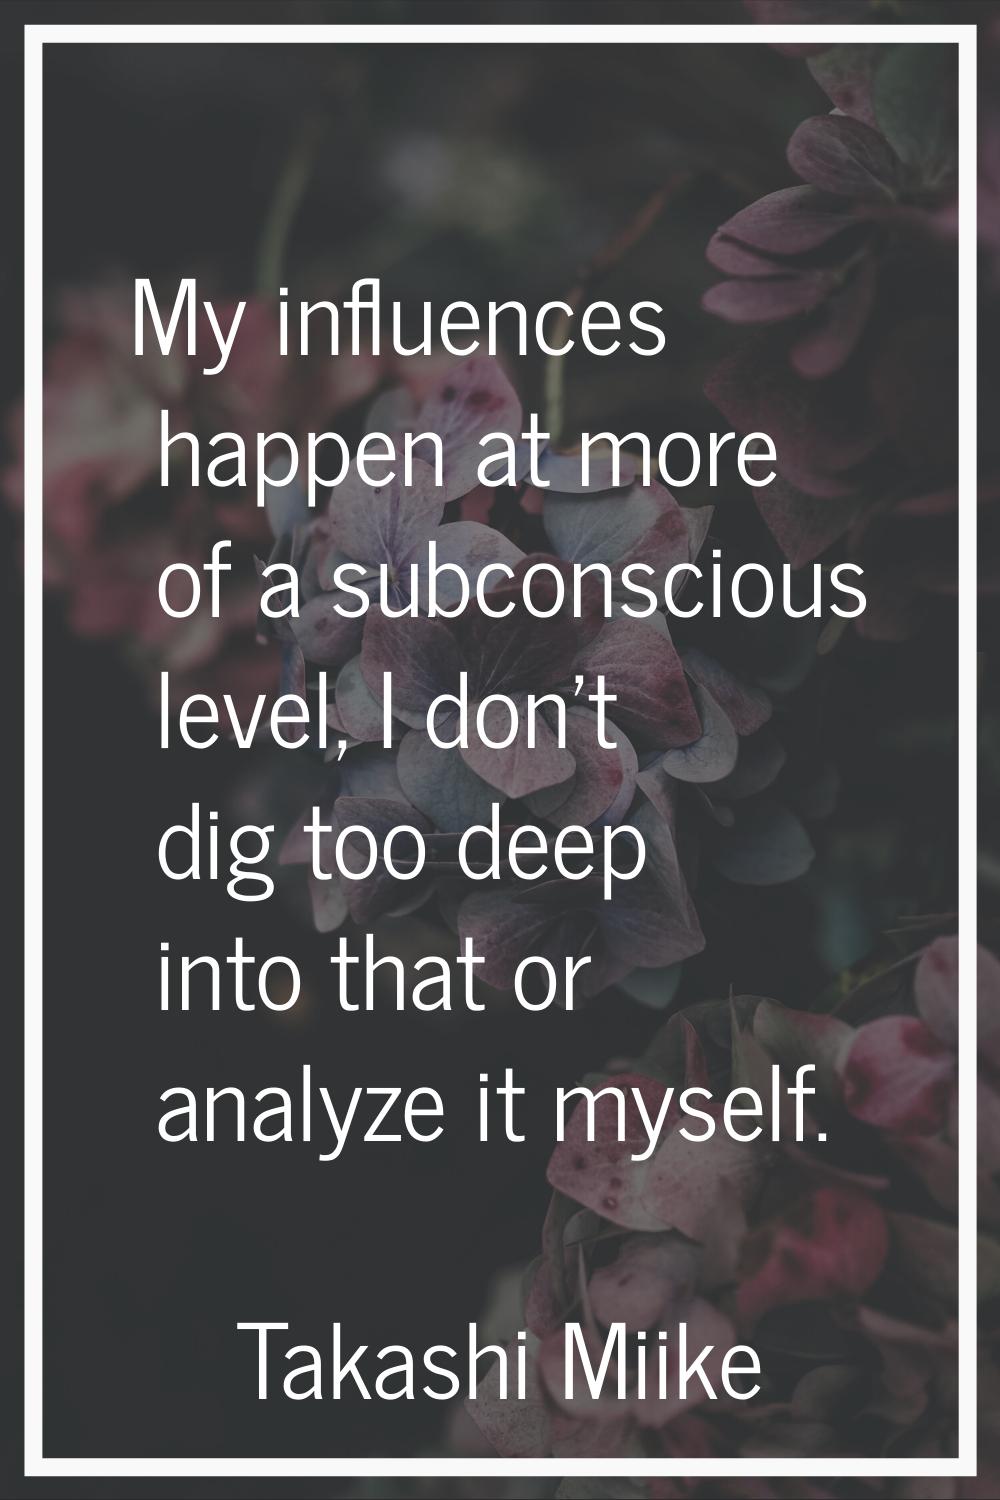 My influences happen at more of a subconscious level, I don't dig too deep into that or analyze it 